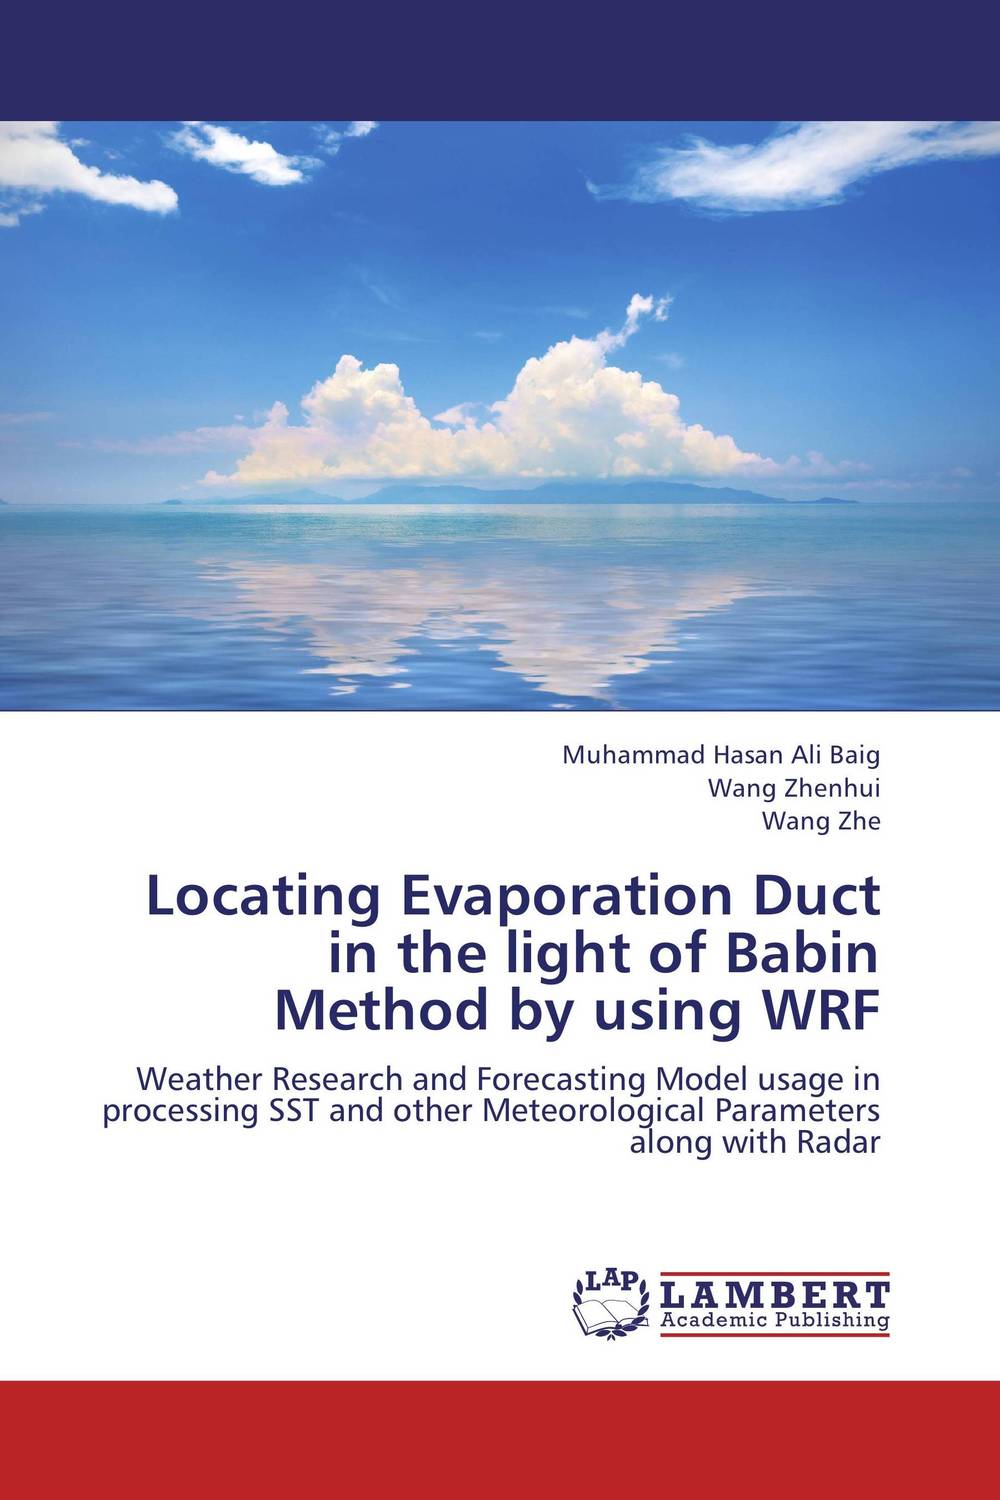 Locating Evaporation Duct in the light of Babin Method by using WRF